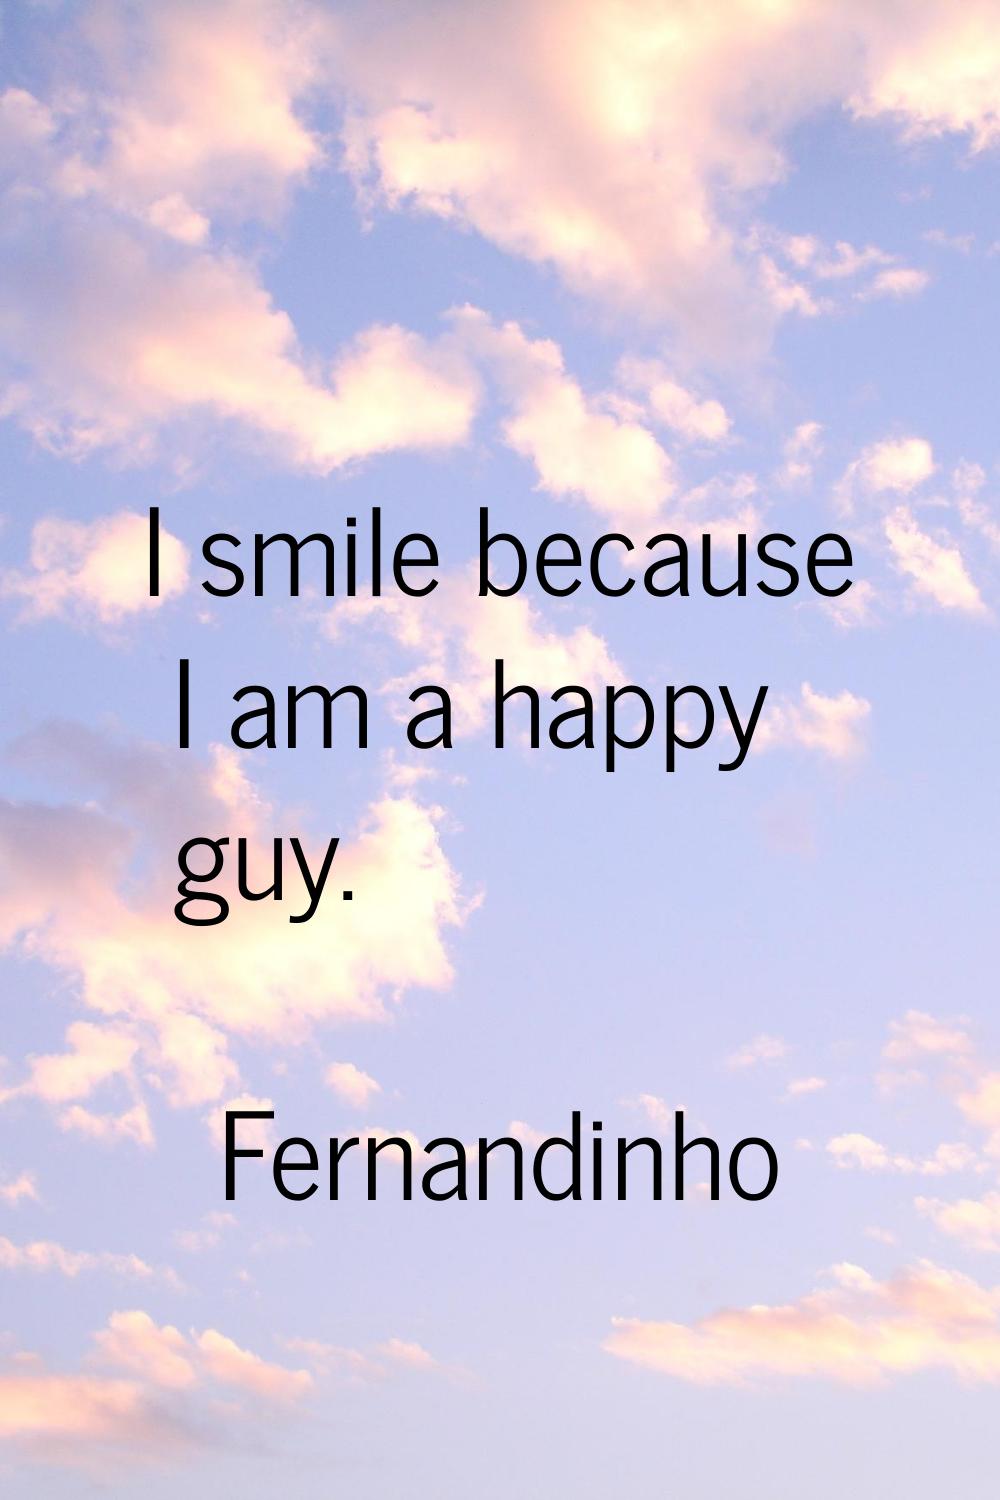 I smile because I am a happy guy.